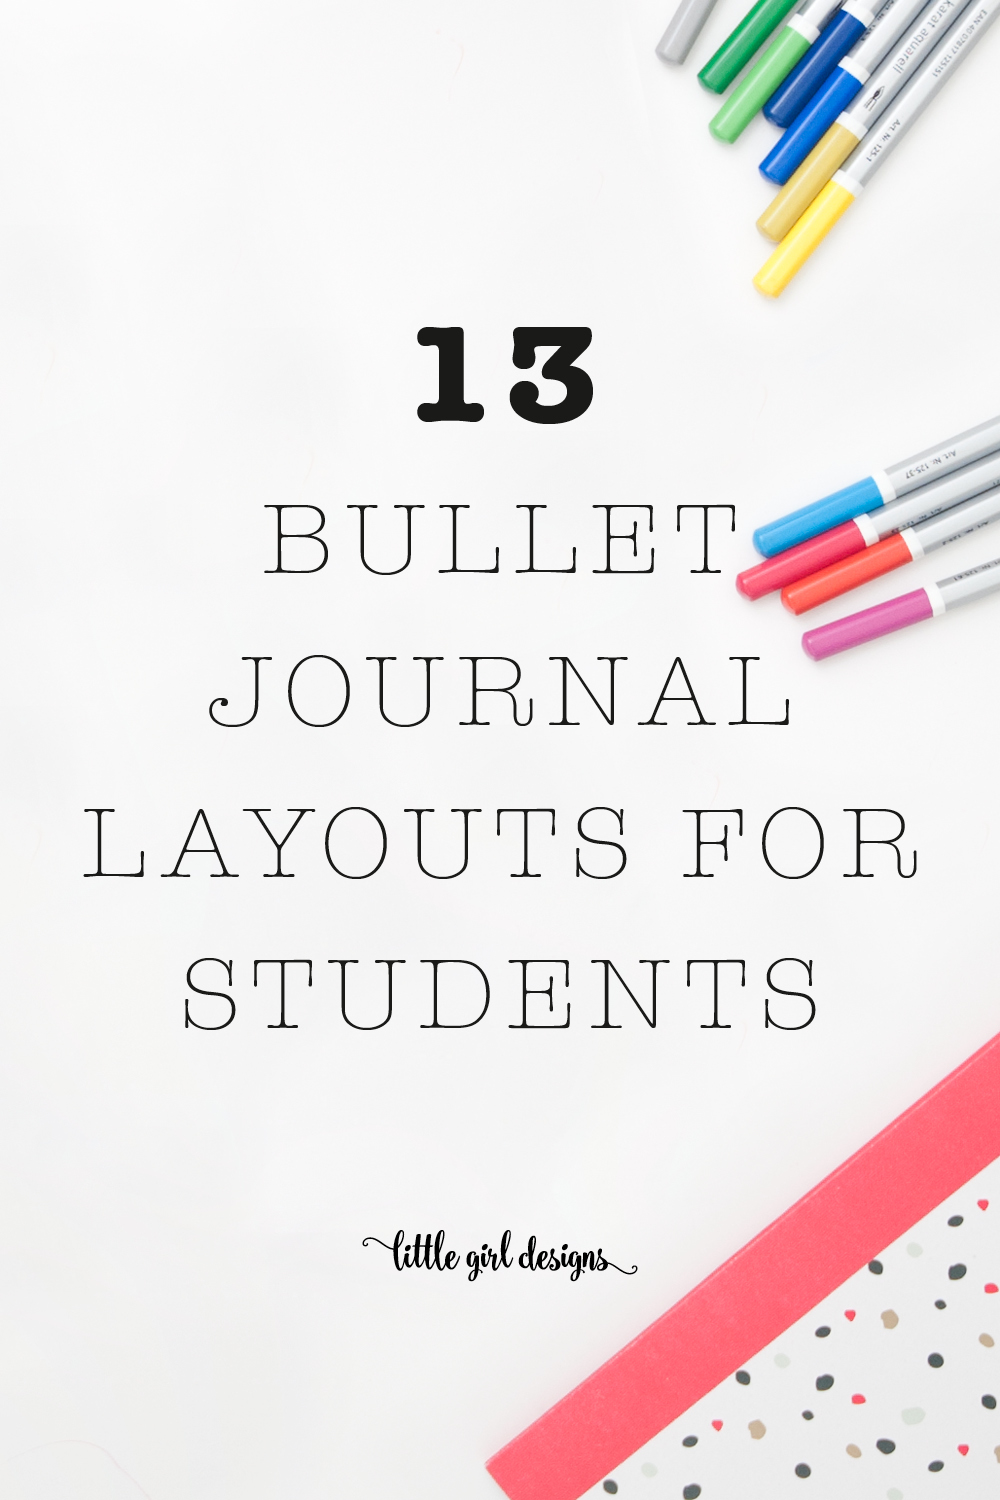 Get organized and inspired by these bullet journal layouts created by students! Use a bullet journal to take notes, journal, keep track of goals, and more!